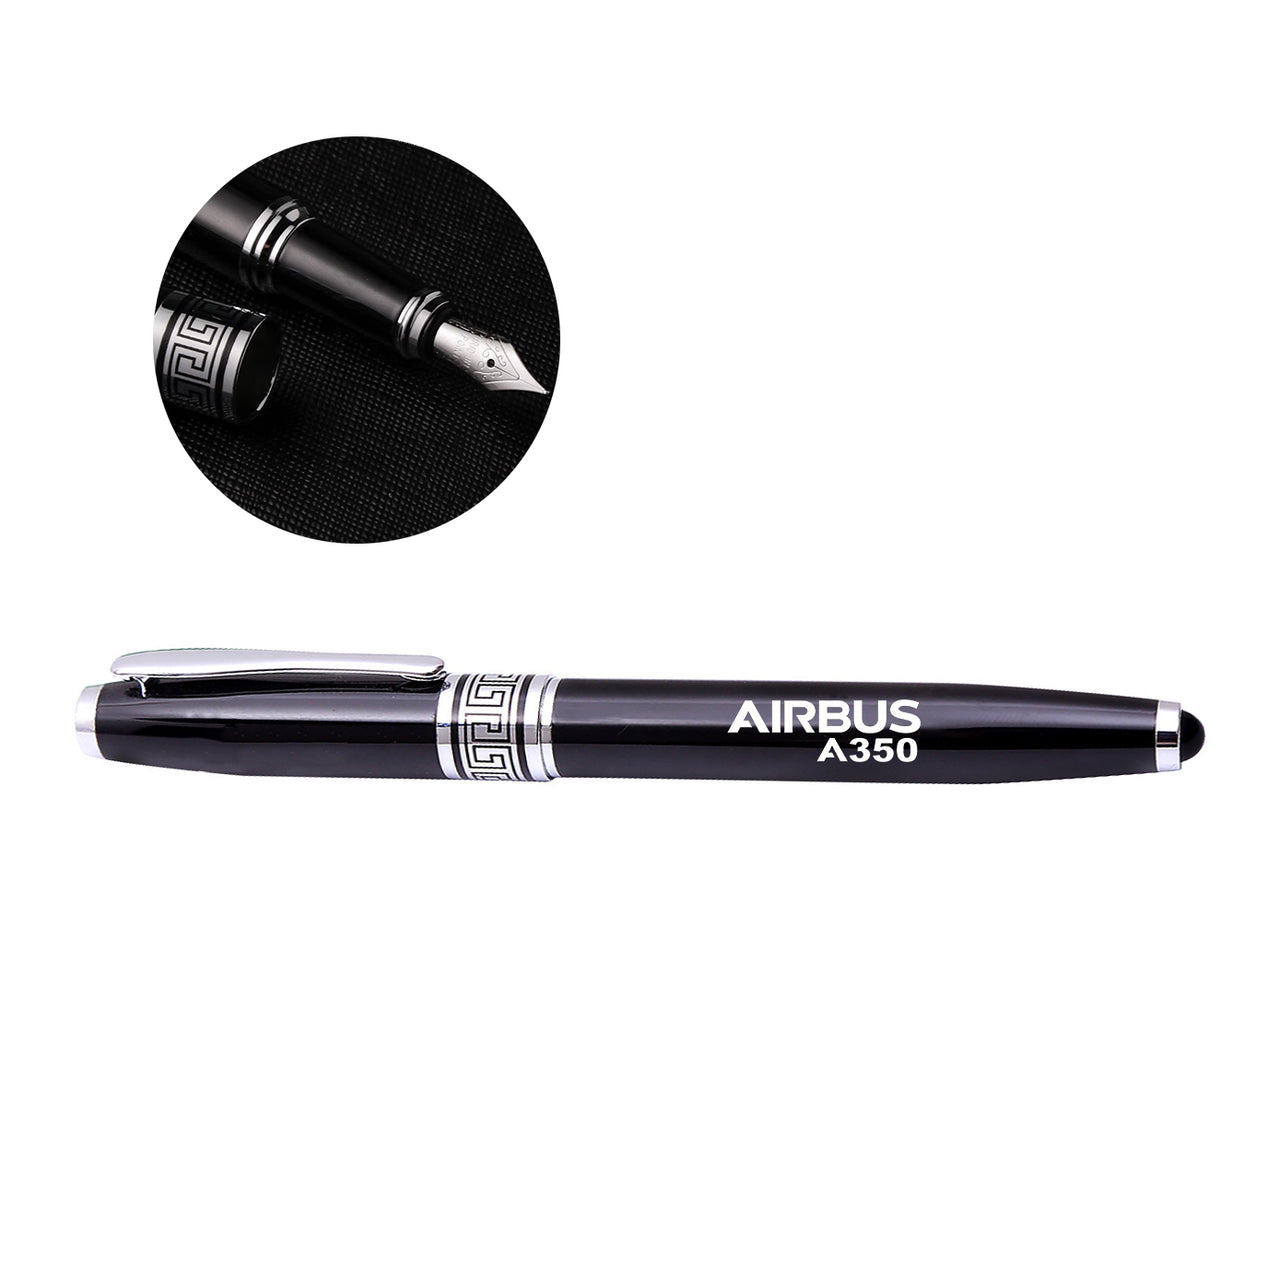 Airbus A350 & Text Designed Pens